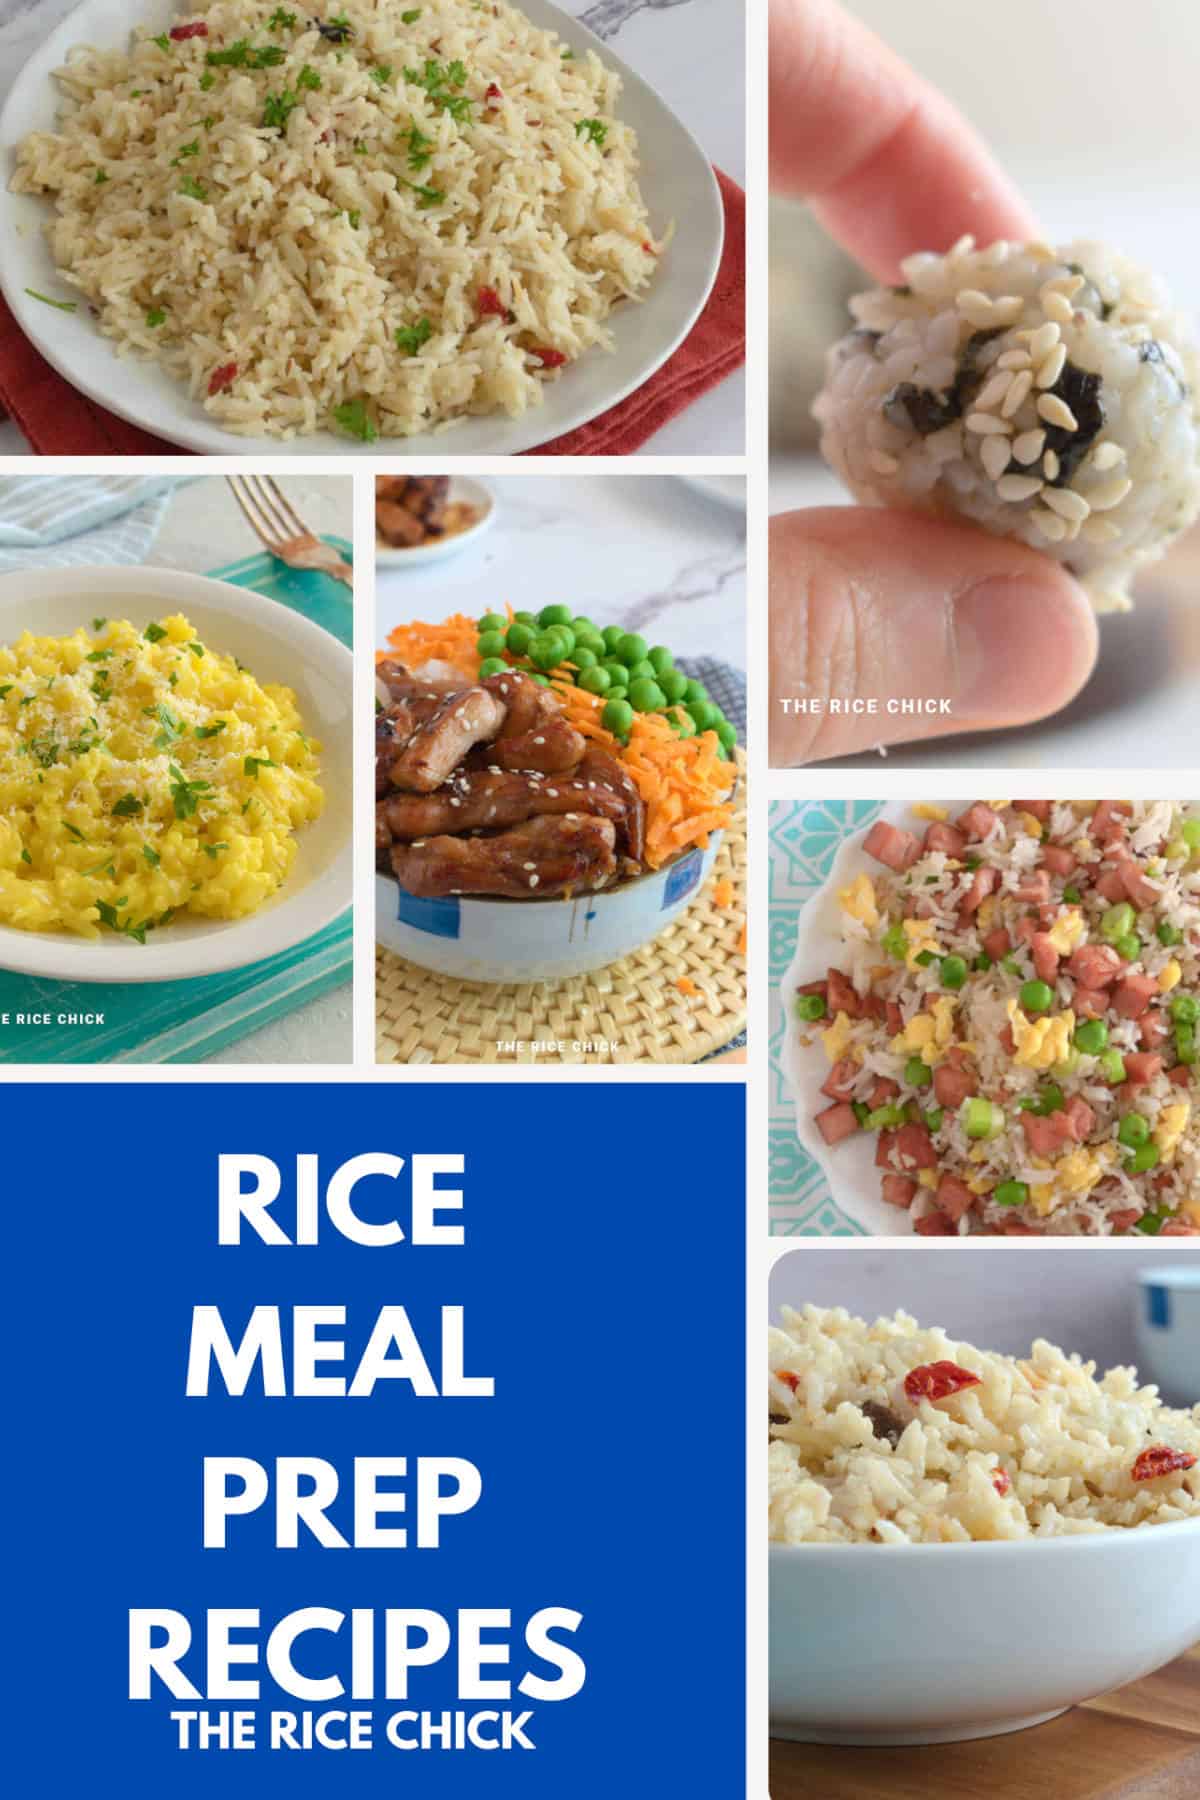 Collection of images of rice meal prep recipes.